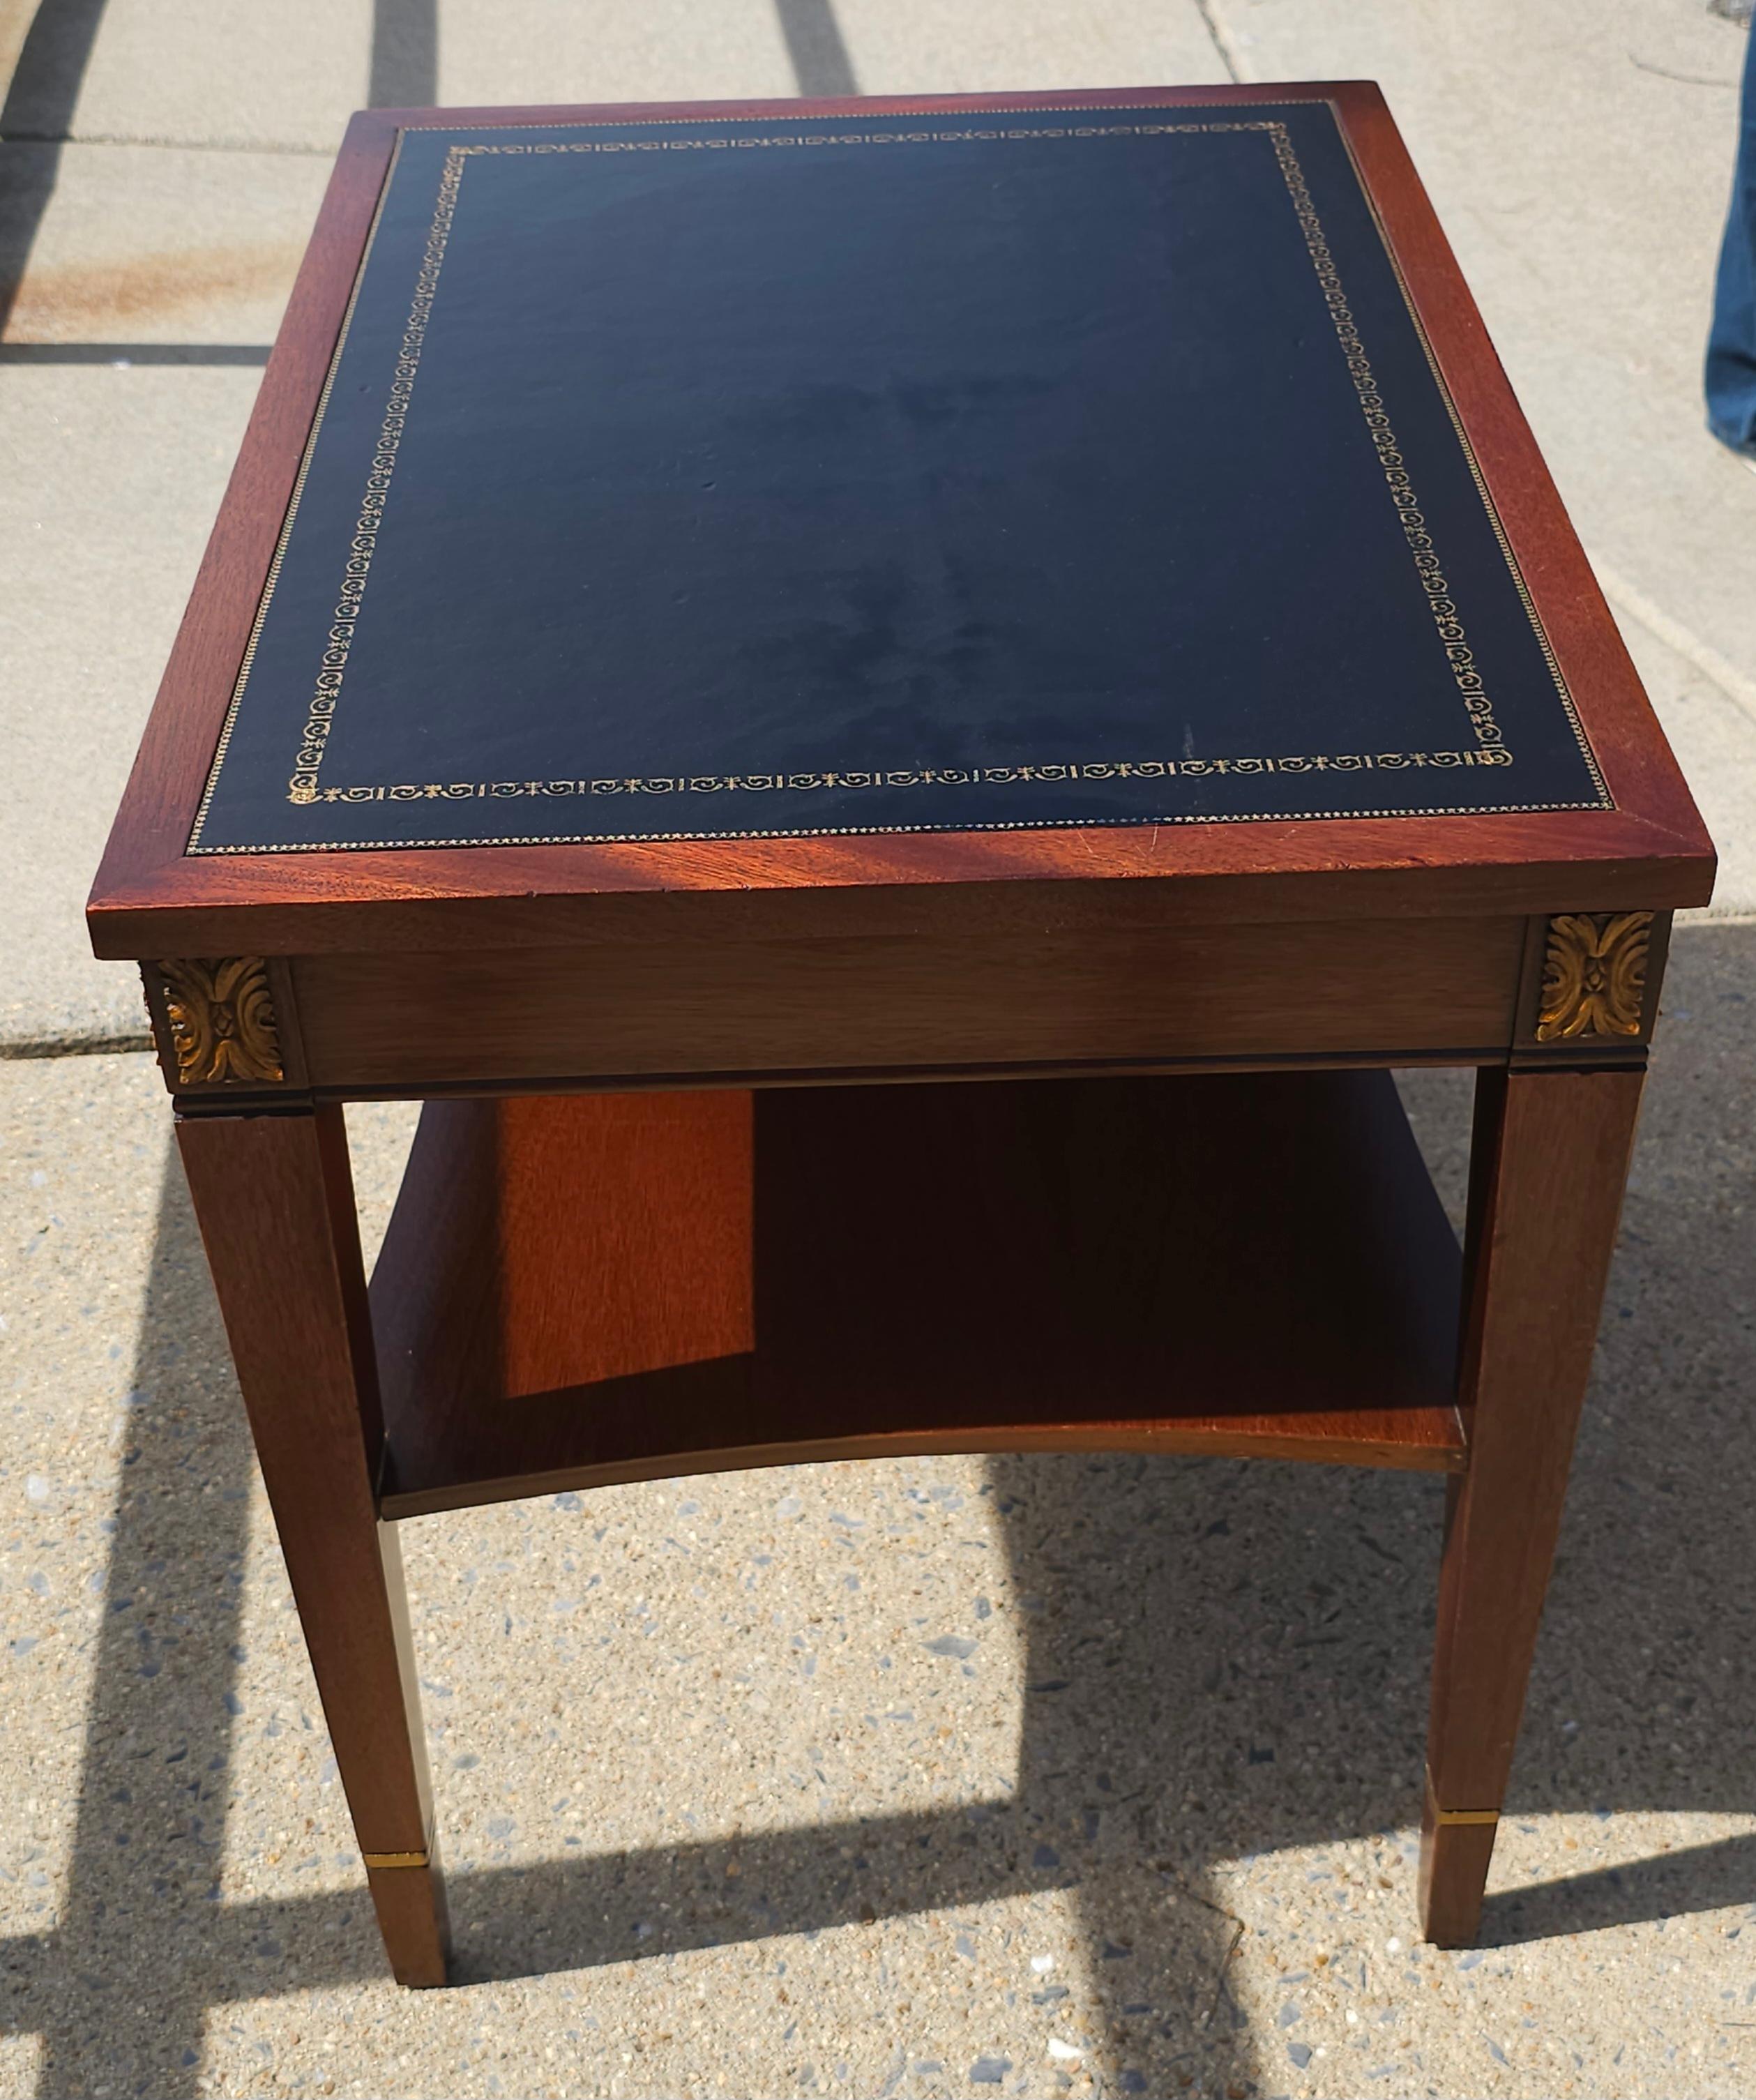 Brandt Furniture Partial Gilt And Tooled Leather Mahogany Tiered Side Table In Good Condition For Sale In Germantown, MD